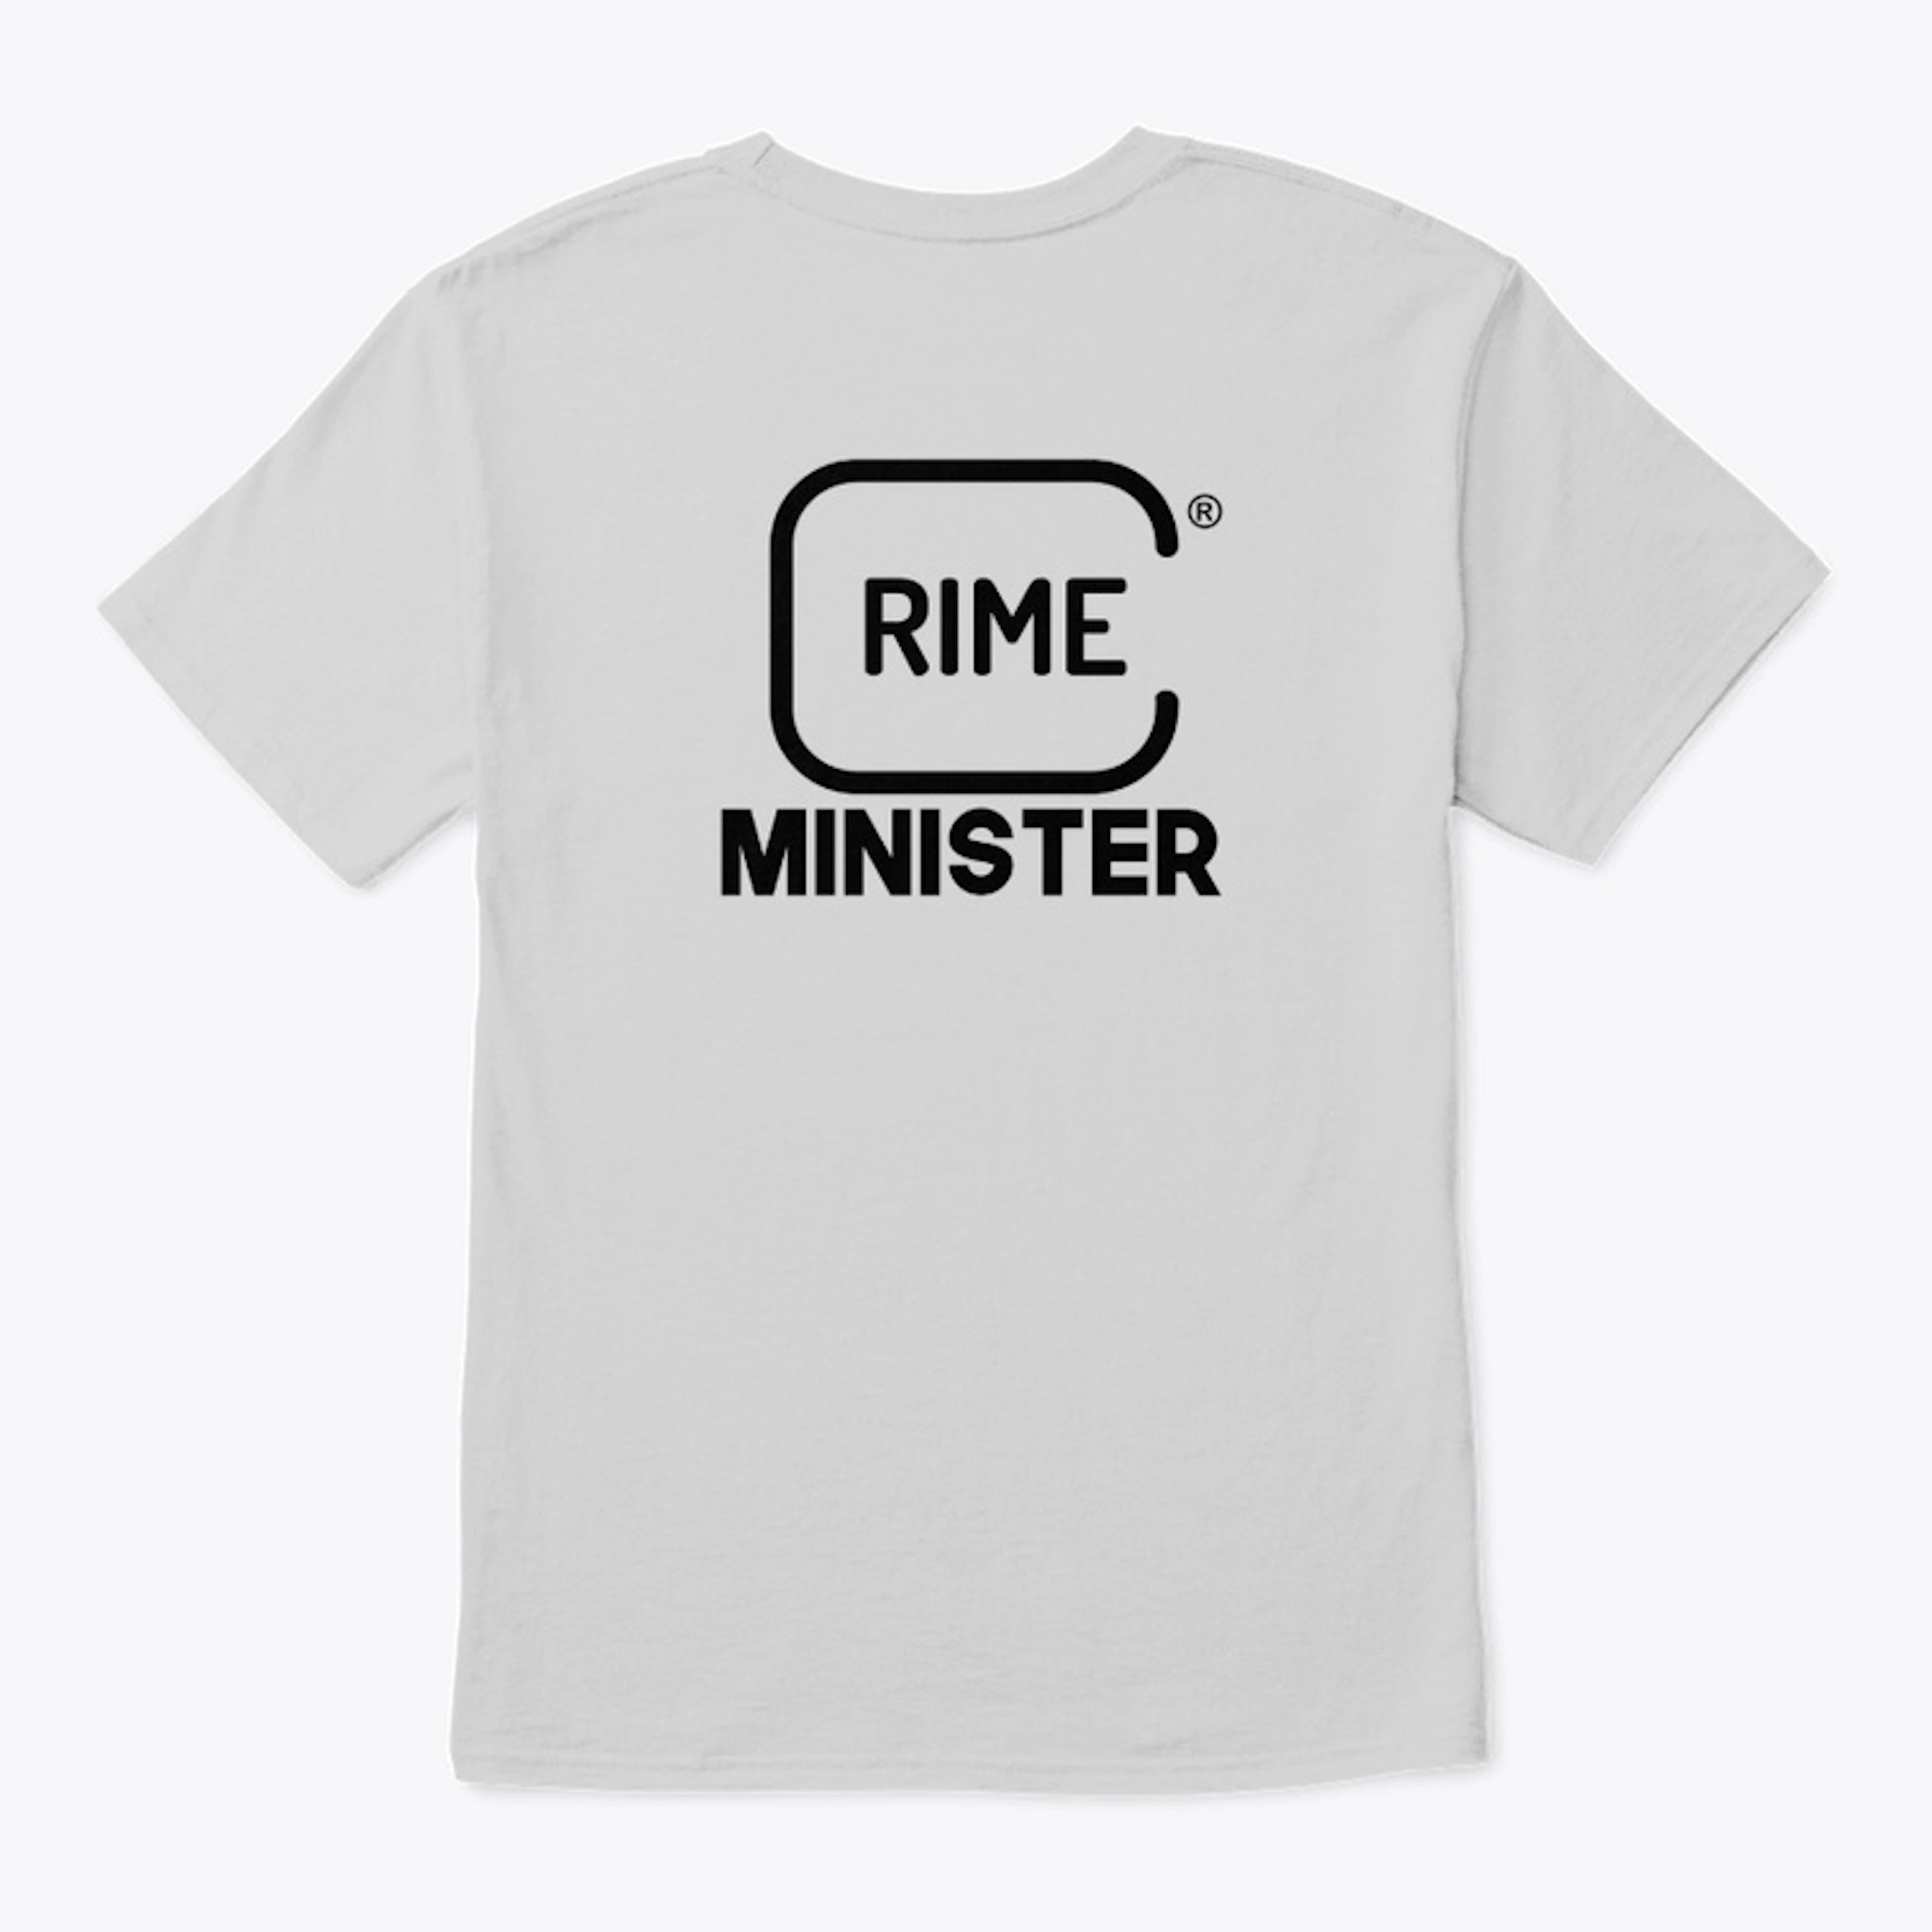 CRIME MINISTER T SHIRT *SPECIAL*